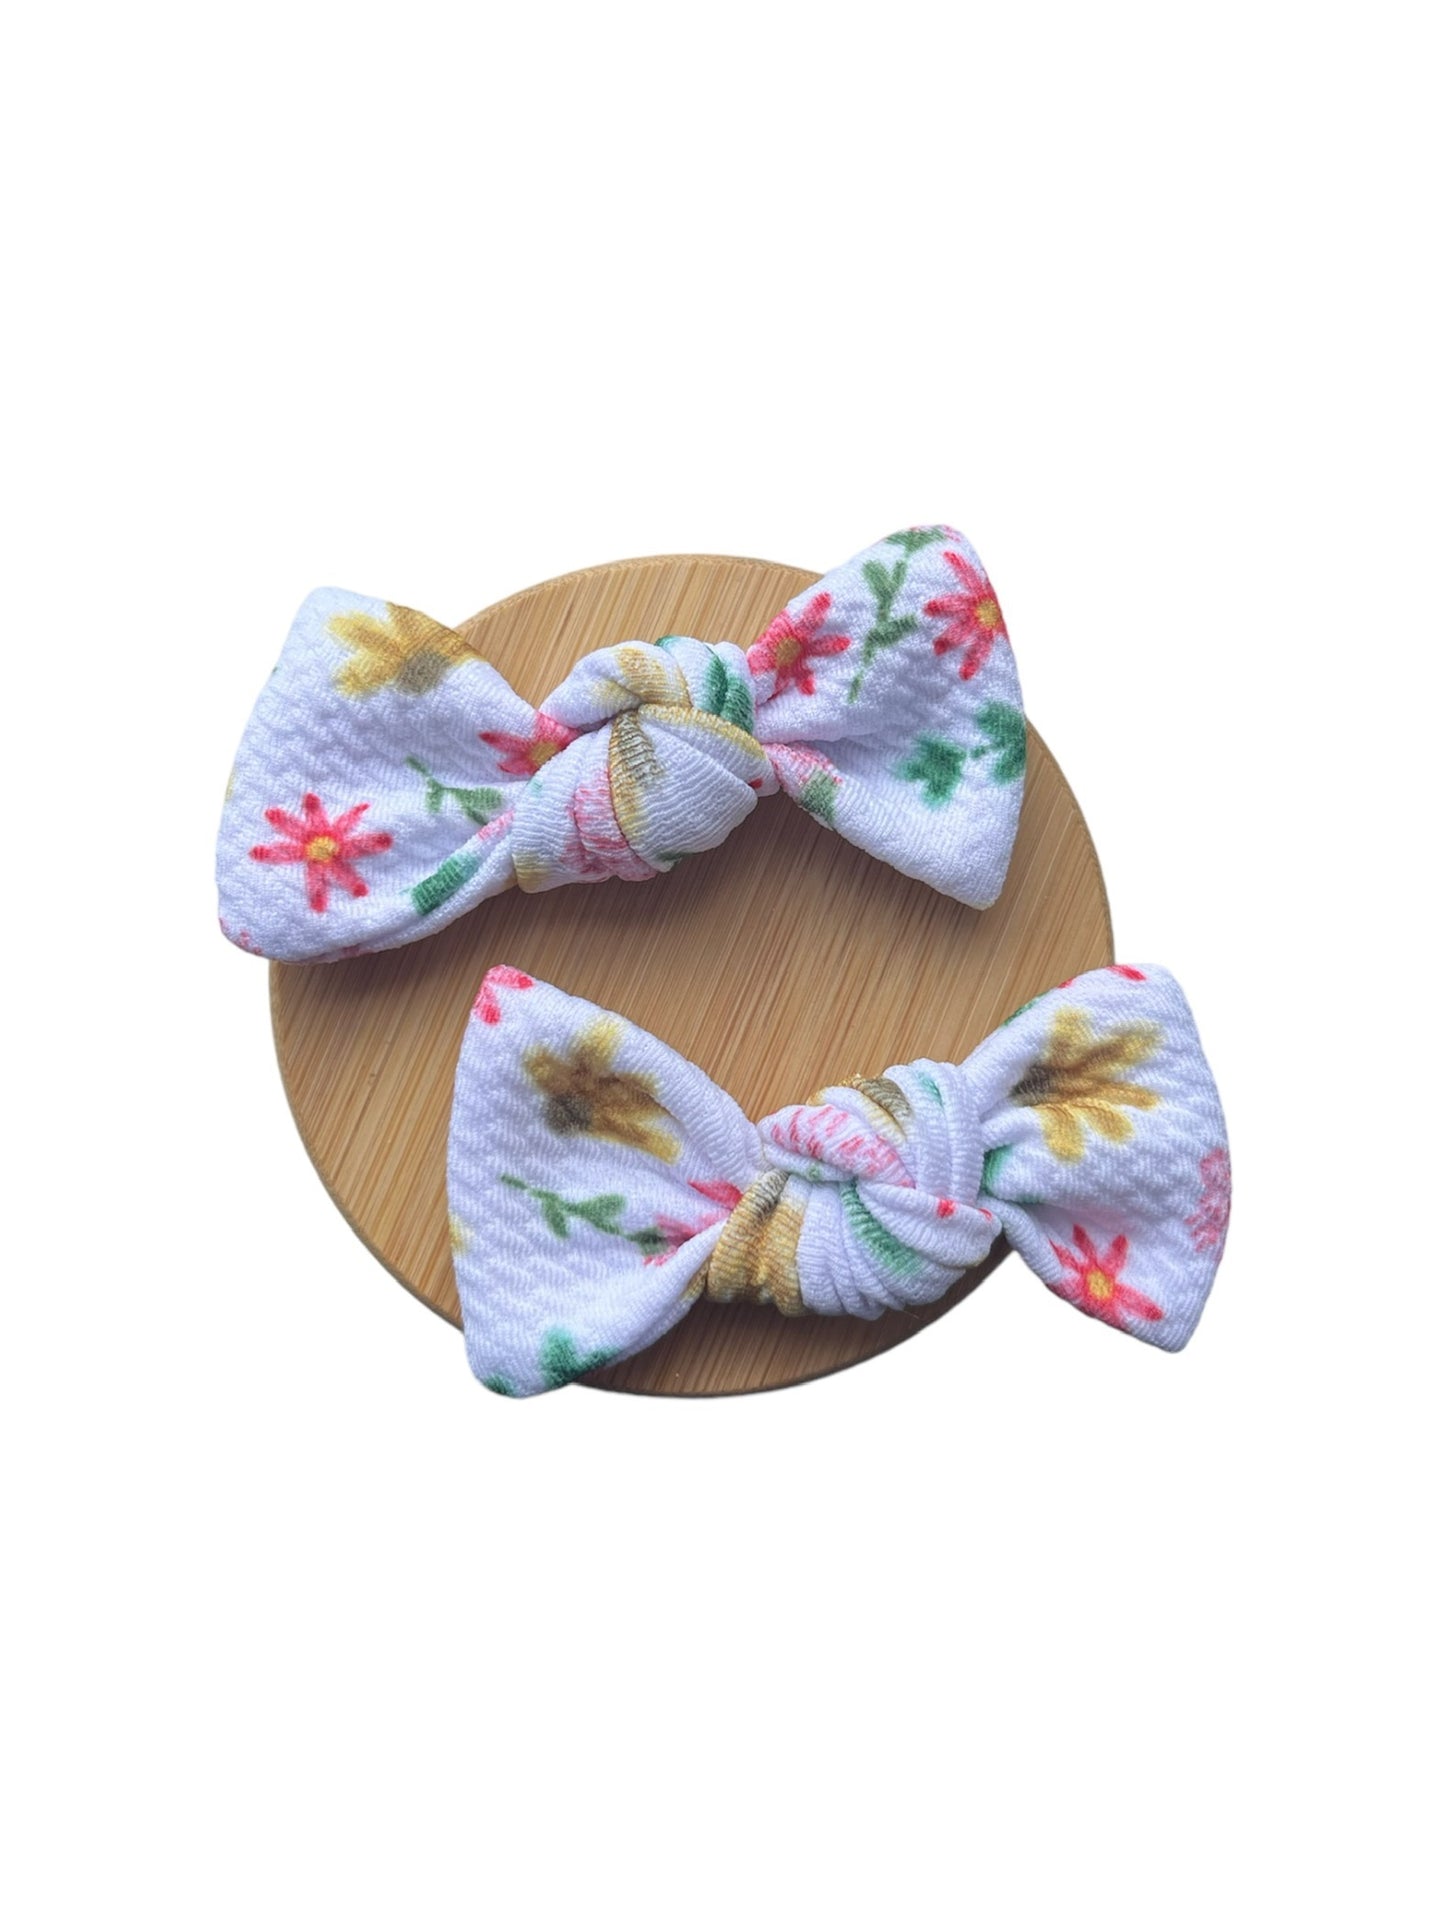 Dainty Floral Knotted Pigtail Bows!